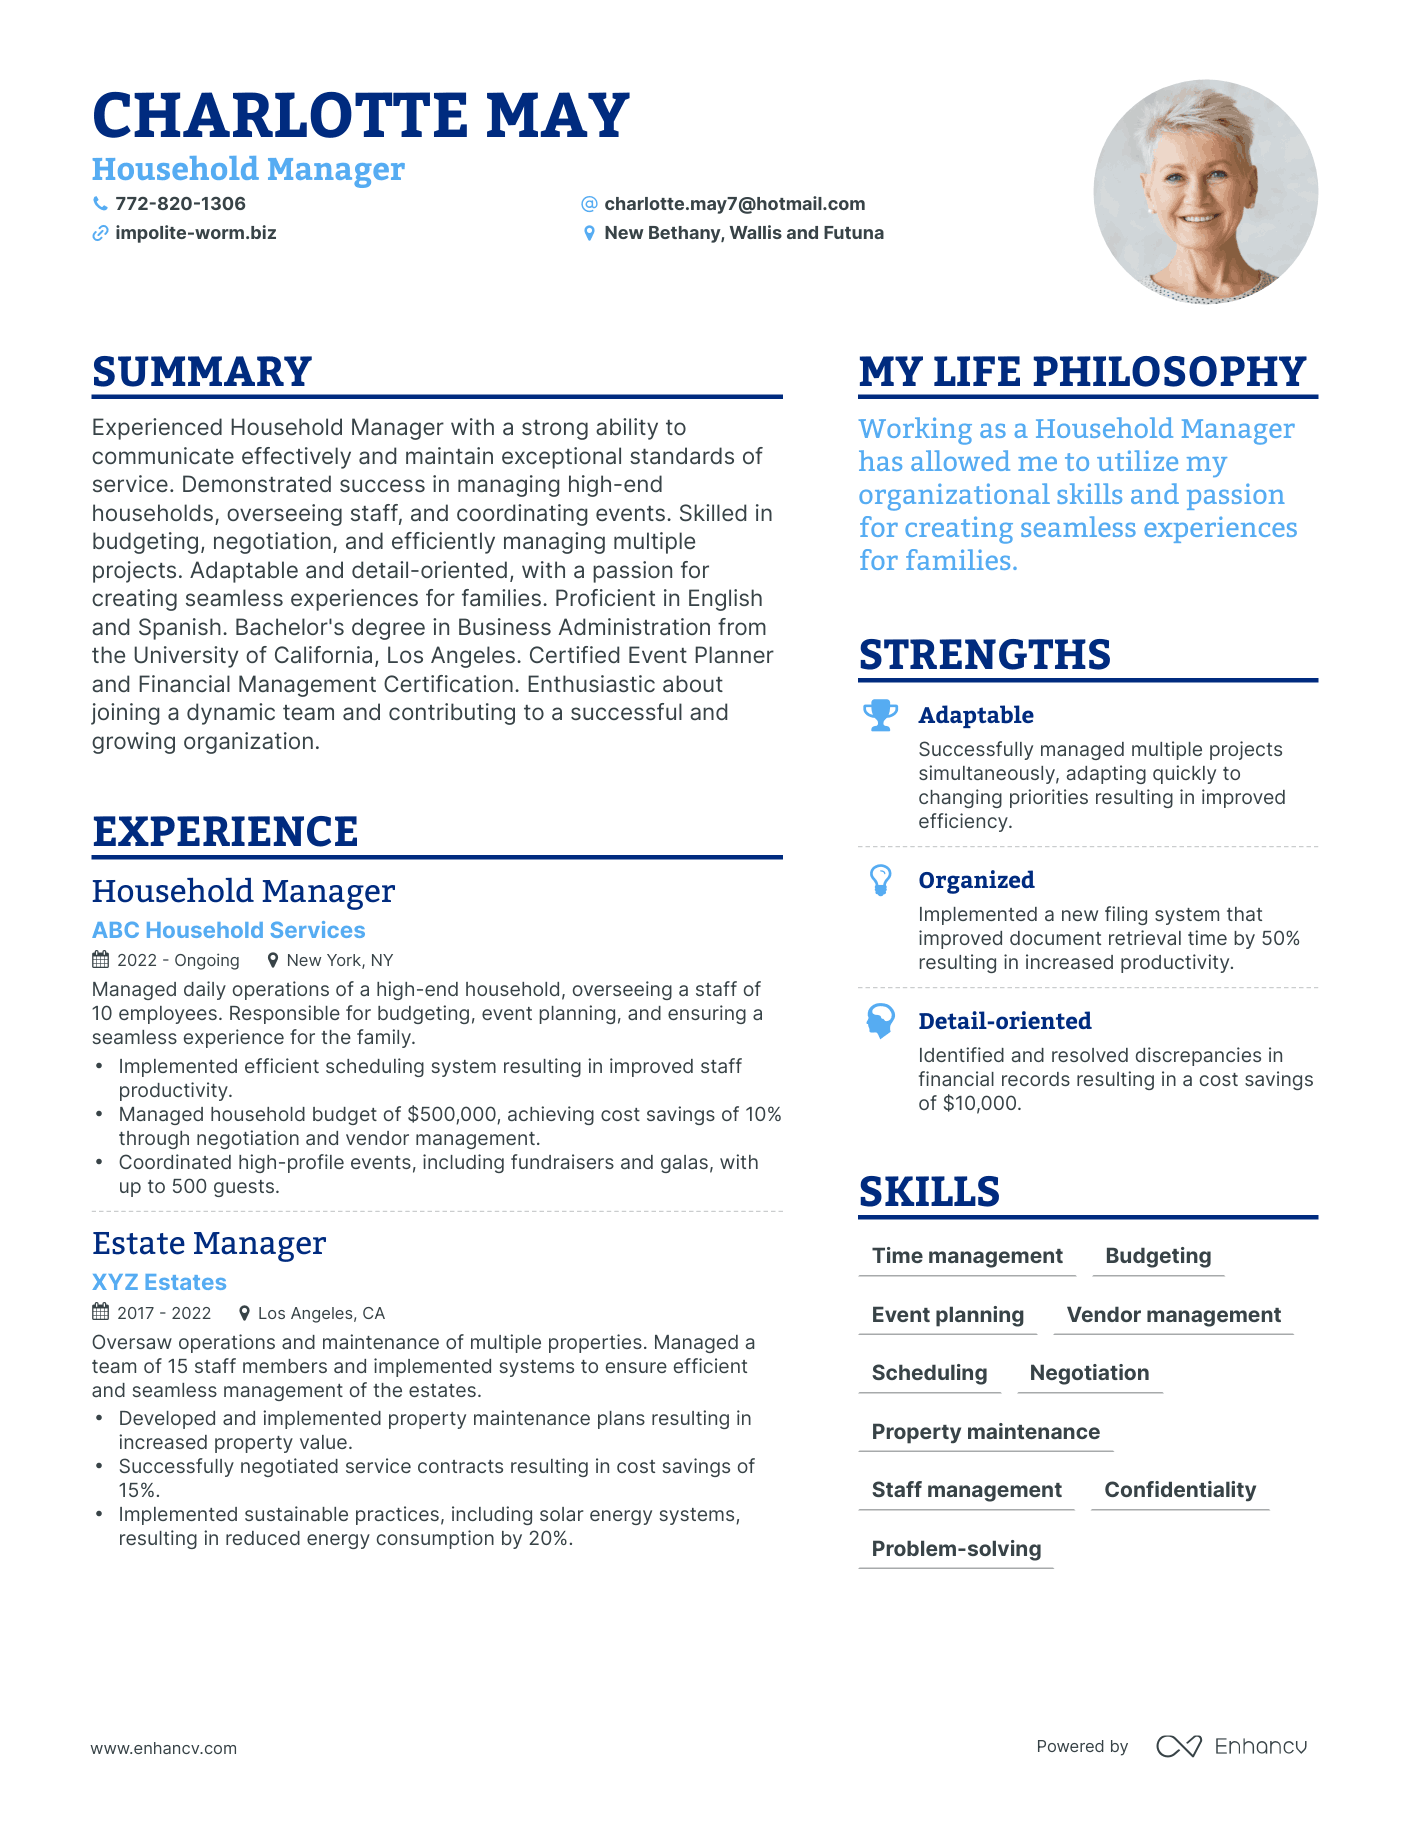 Household Manager resume example